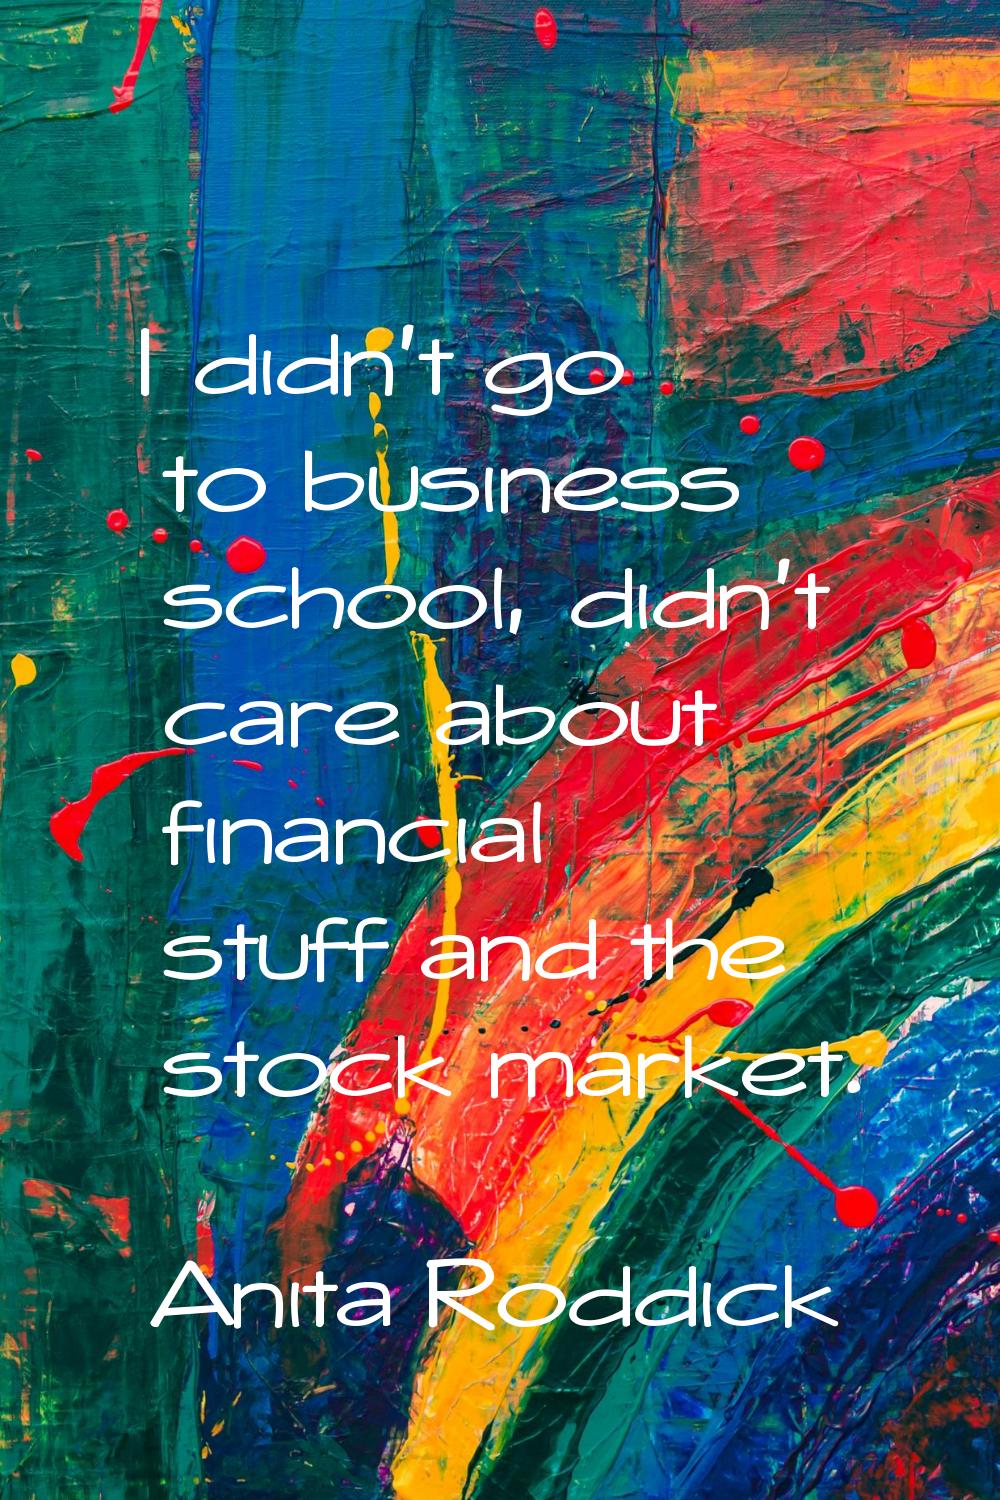 I didn't go to business school, didn't care about financial stuff and the stock market.